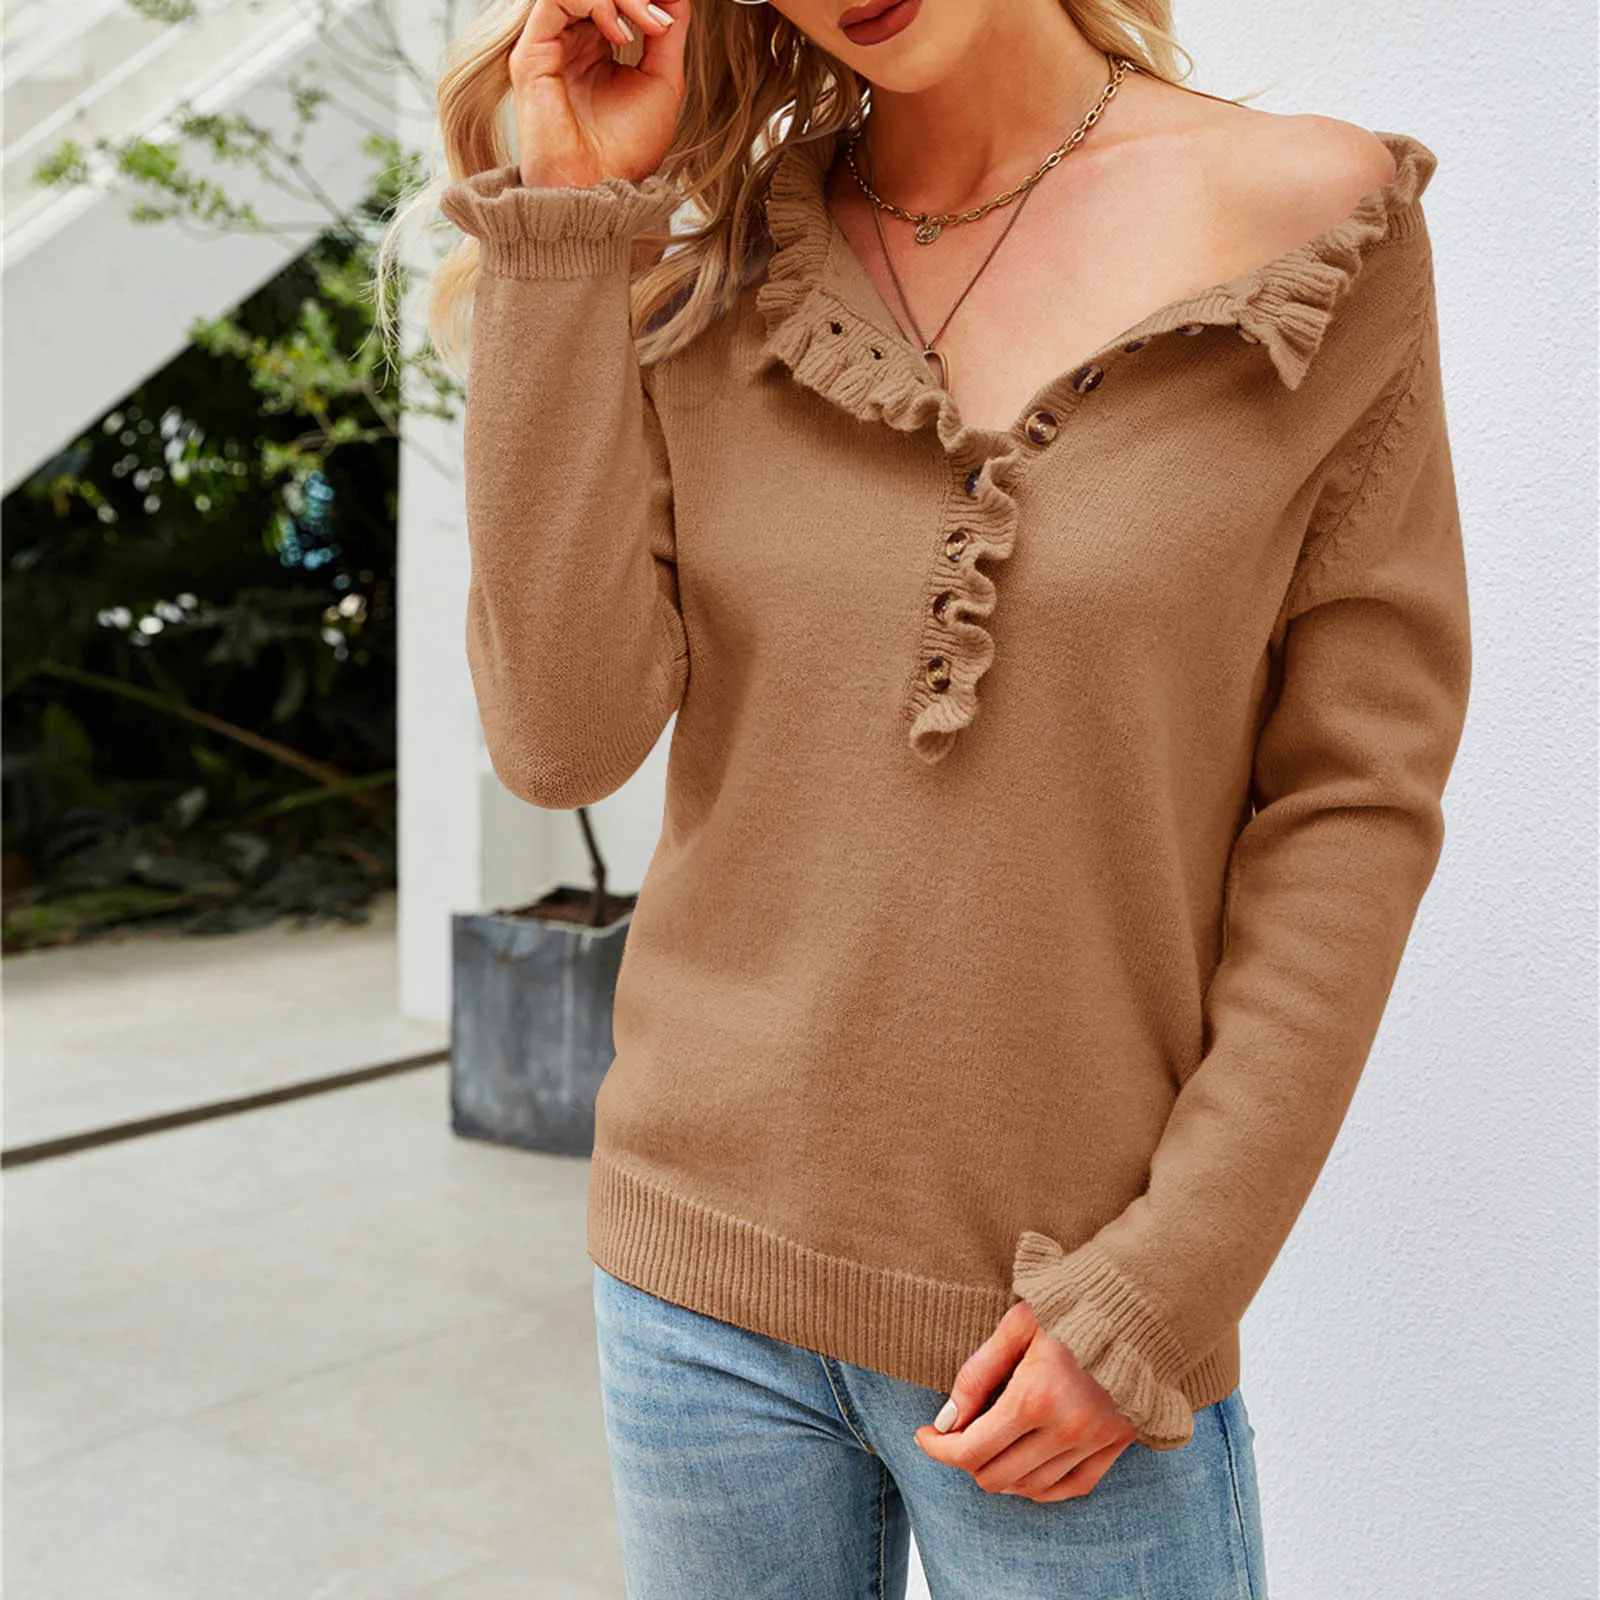 Womens V Neck Long Sleeve Ruffle Knit Oversized Sweaters Casual Solid Color Button Down Sweater Pullover Blouses Tops 